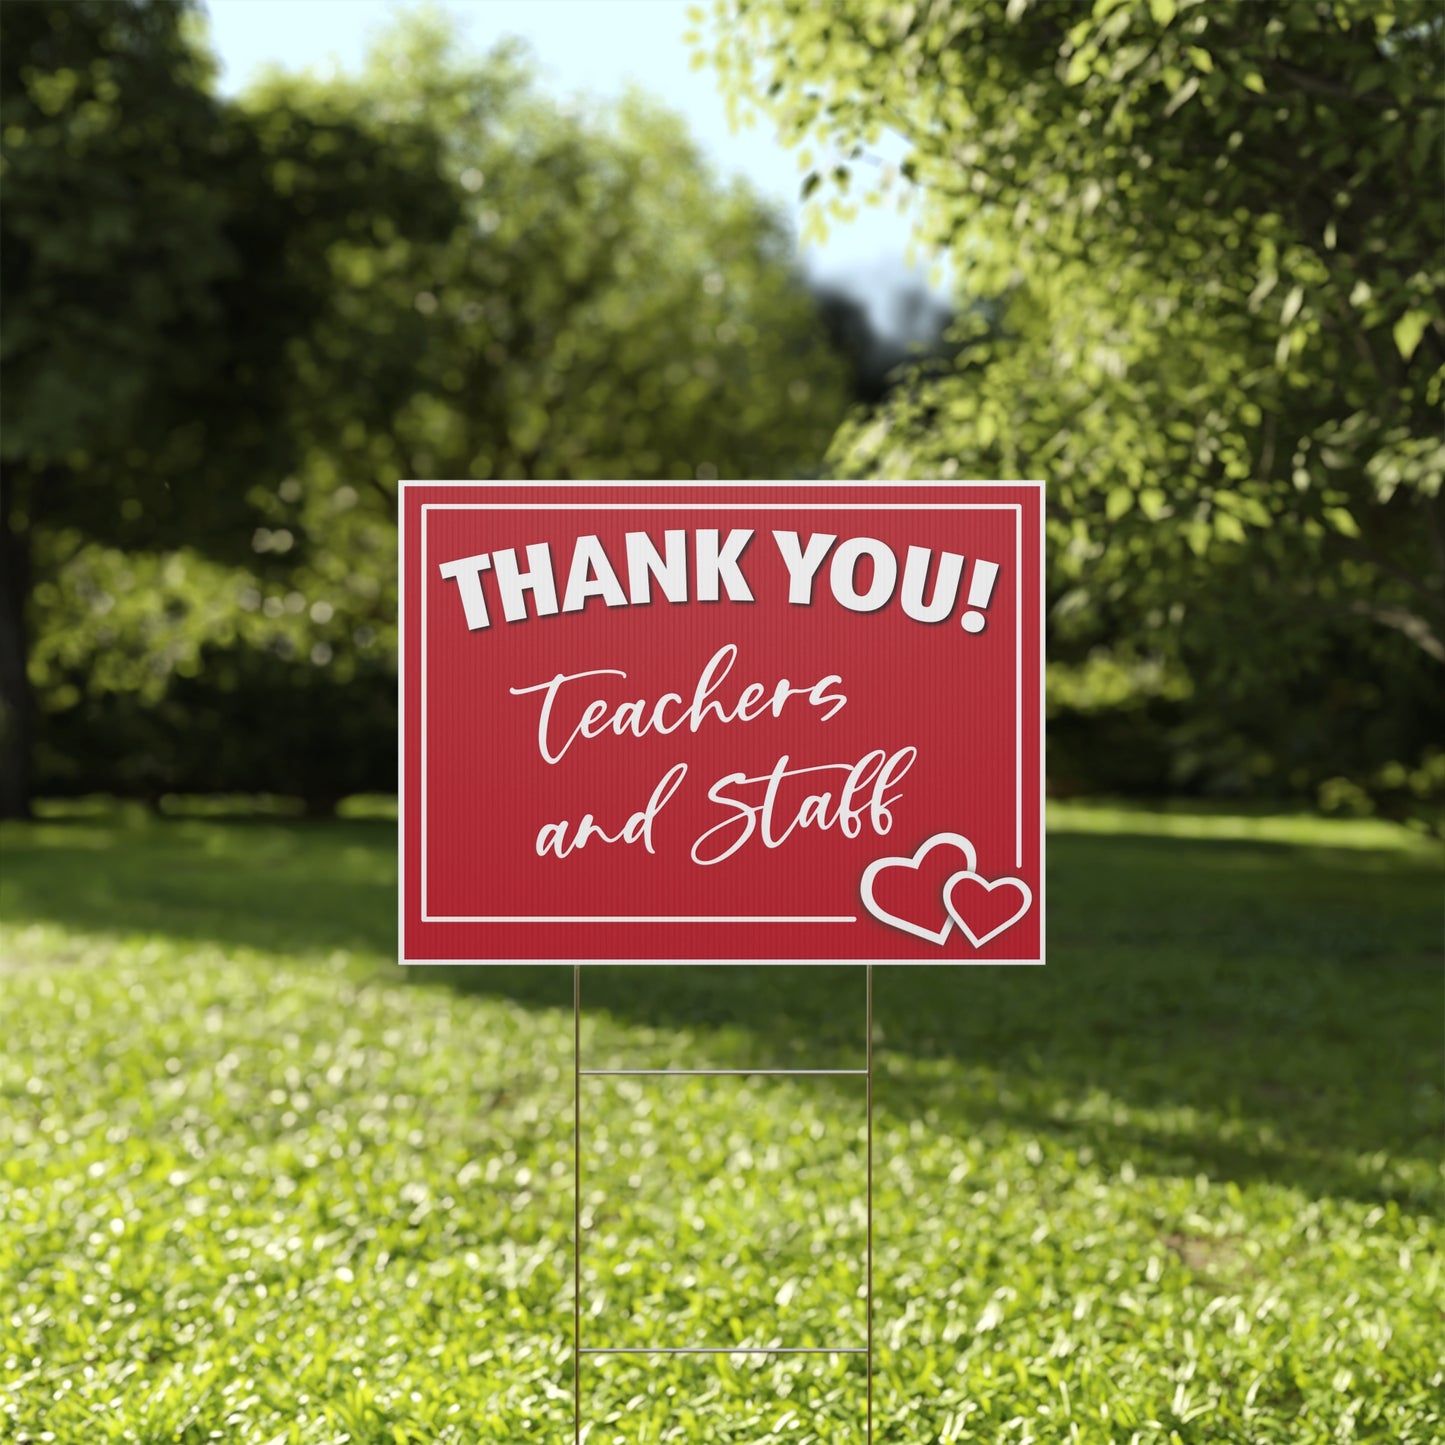 Thank You Teachers and Staff, Making a Difference, Yard Sign, Printed 2-Sided -18 x 12,24x18 or 36x24, Metal H-Stake Included, v4